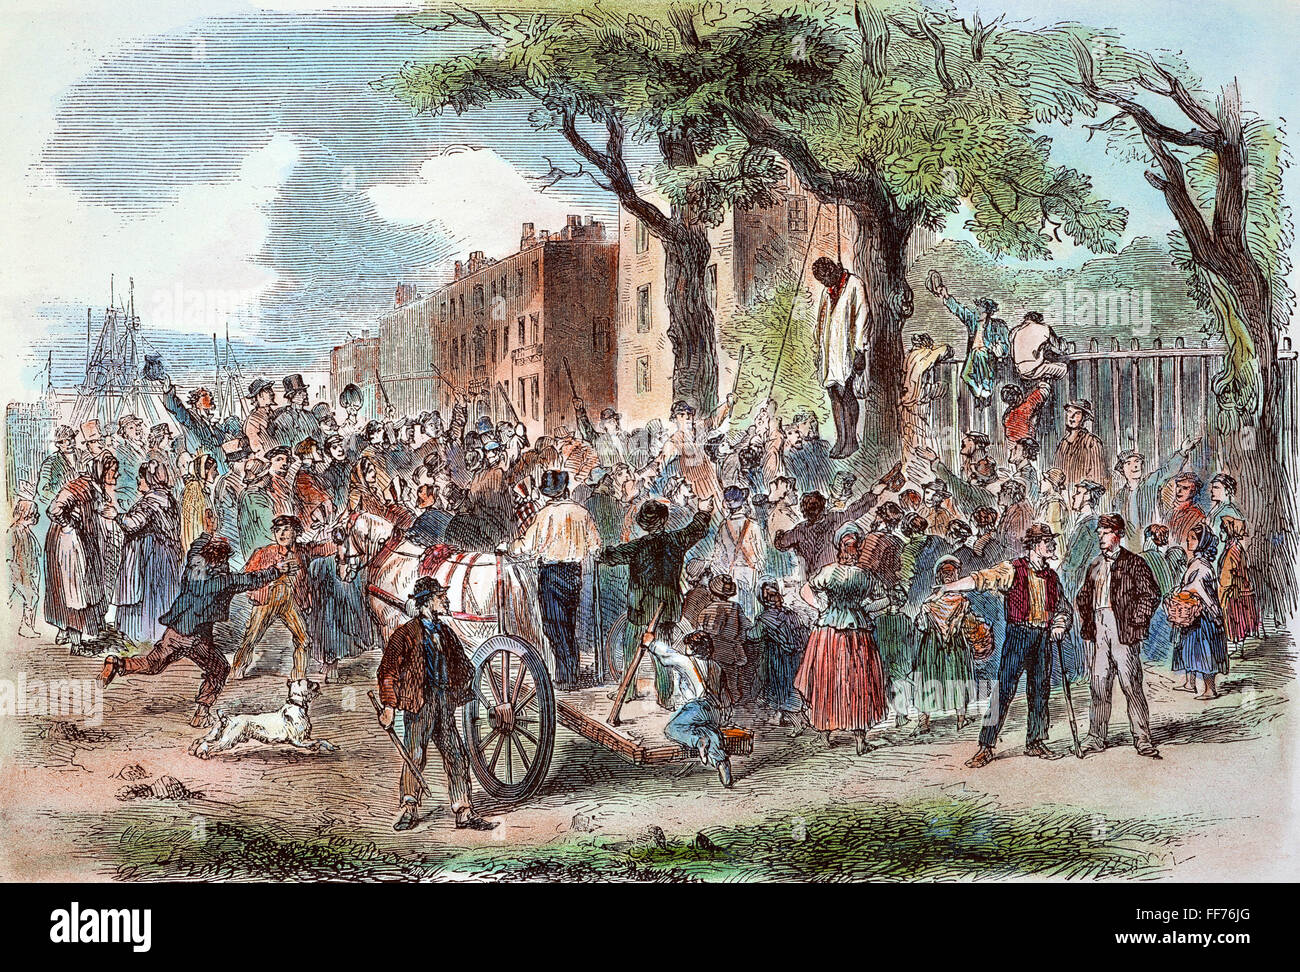 NEW YORK: LYNCHING, 1863. /nThe mob lynching a black man in Clarkson Street during the New York City Draft Riots of 13-16 July 1863: contemporary colored engraving. Stock Photo